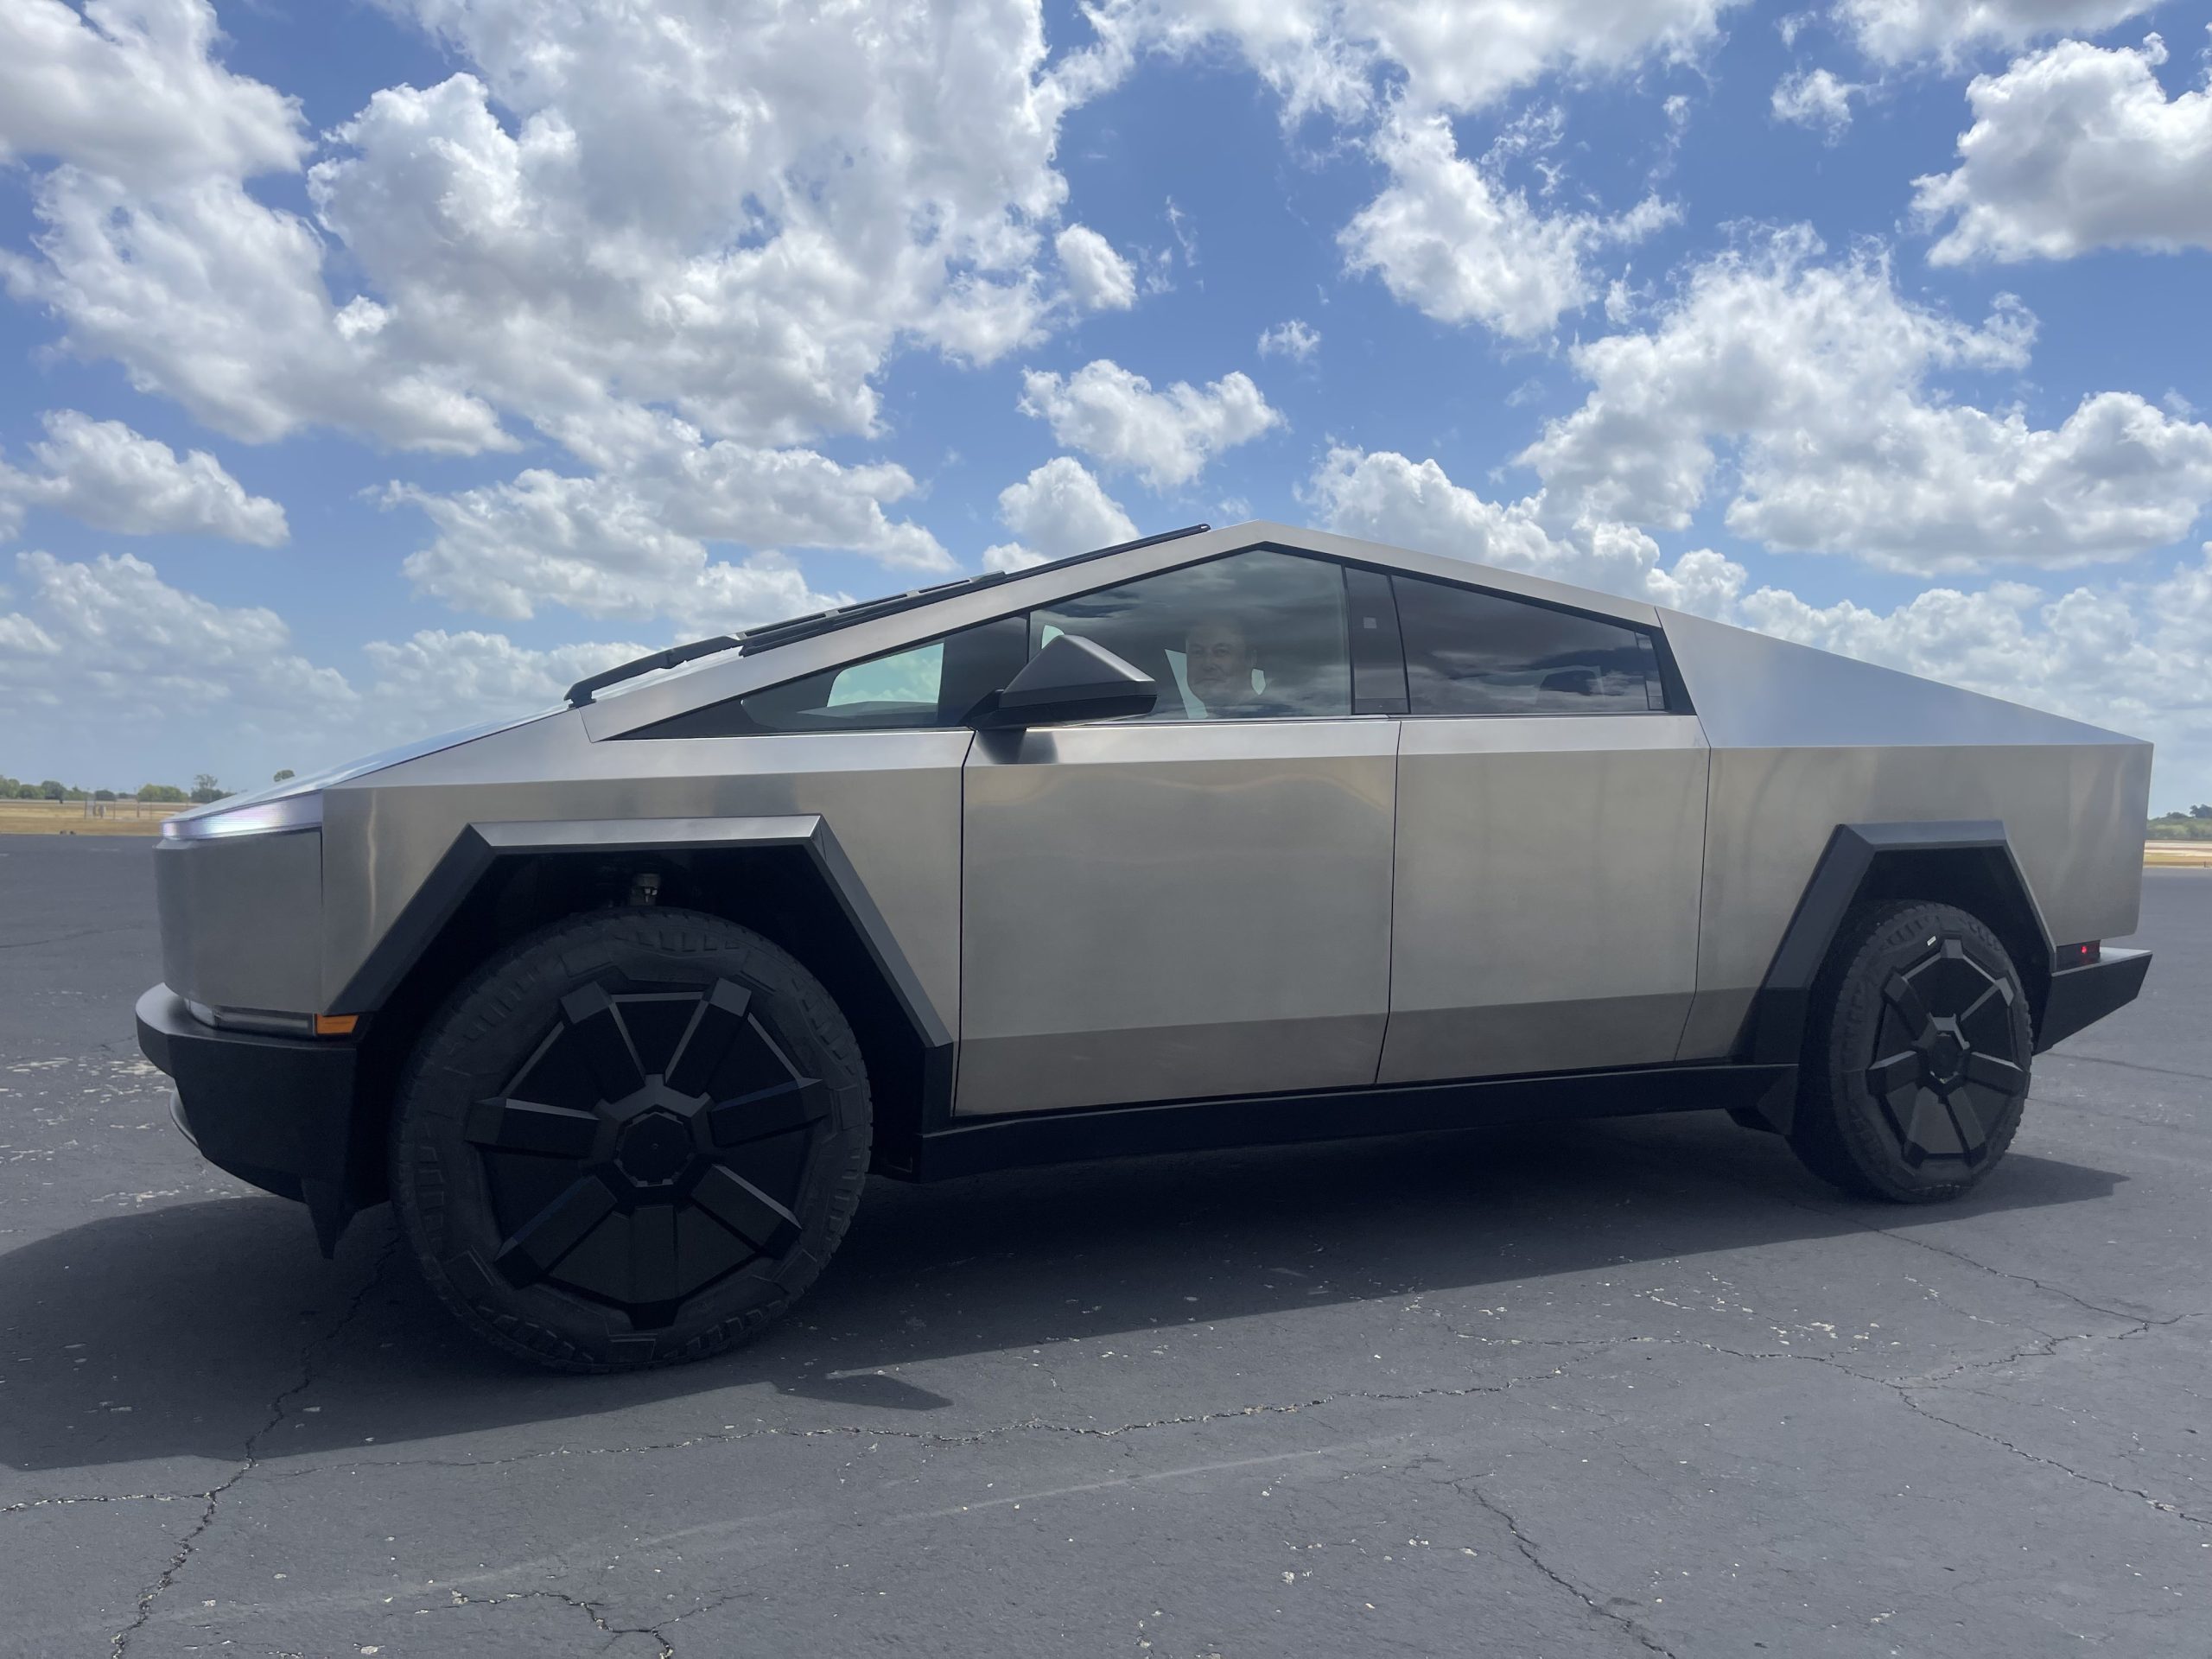 Tesla Cybertruck payload and towing capacity confirmed in showroom ad